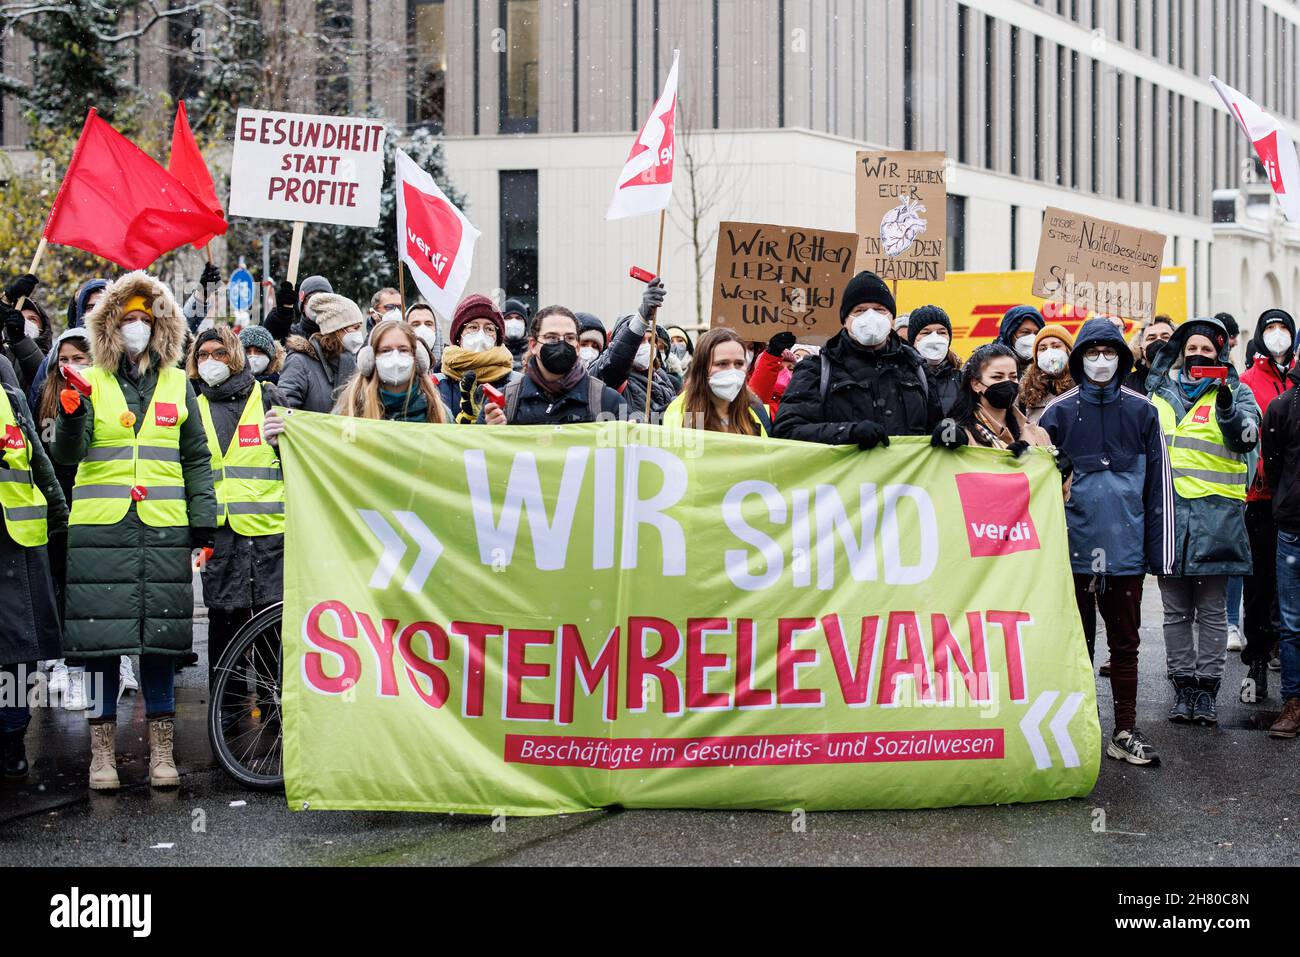 Munich, Germany. 26th Nov, 2021. Demonstration participants hold a banner with the inscription 'Wir sind systemrelevant - Beschäftigte im Gesundheits- und Sozialwesen' in front of them during a demonstration of hospital employees in front of the inner city hospital. In the run-up to the 3rd round of negotiations in the public service of the Länder on 27 and 28 November 2021 in Potsdam, according to Verdi, the employees of the university hospitals in Augsburg, Regensburg, Munich, Erlangen and Würzburg want to participate in work stoppages. Credit: Matthias Balk/dpa/Alamy Live News Stock Photo